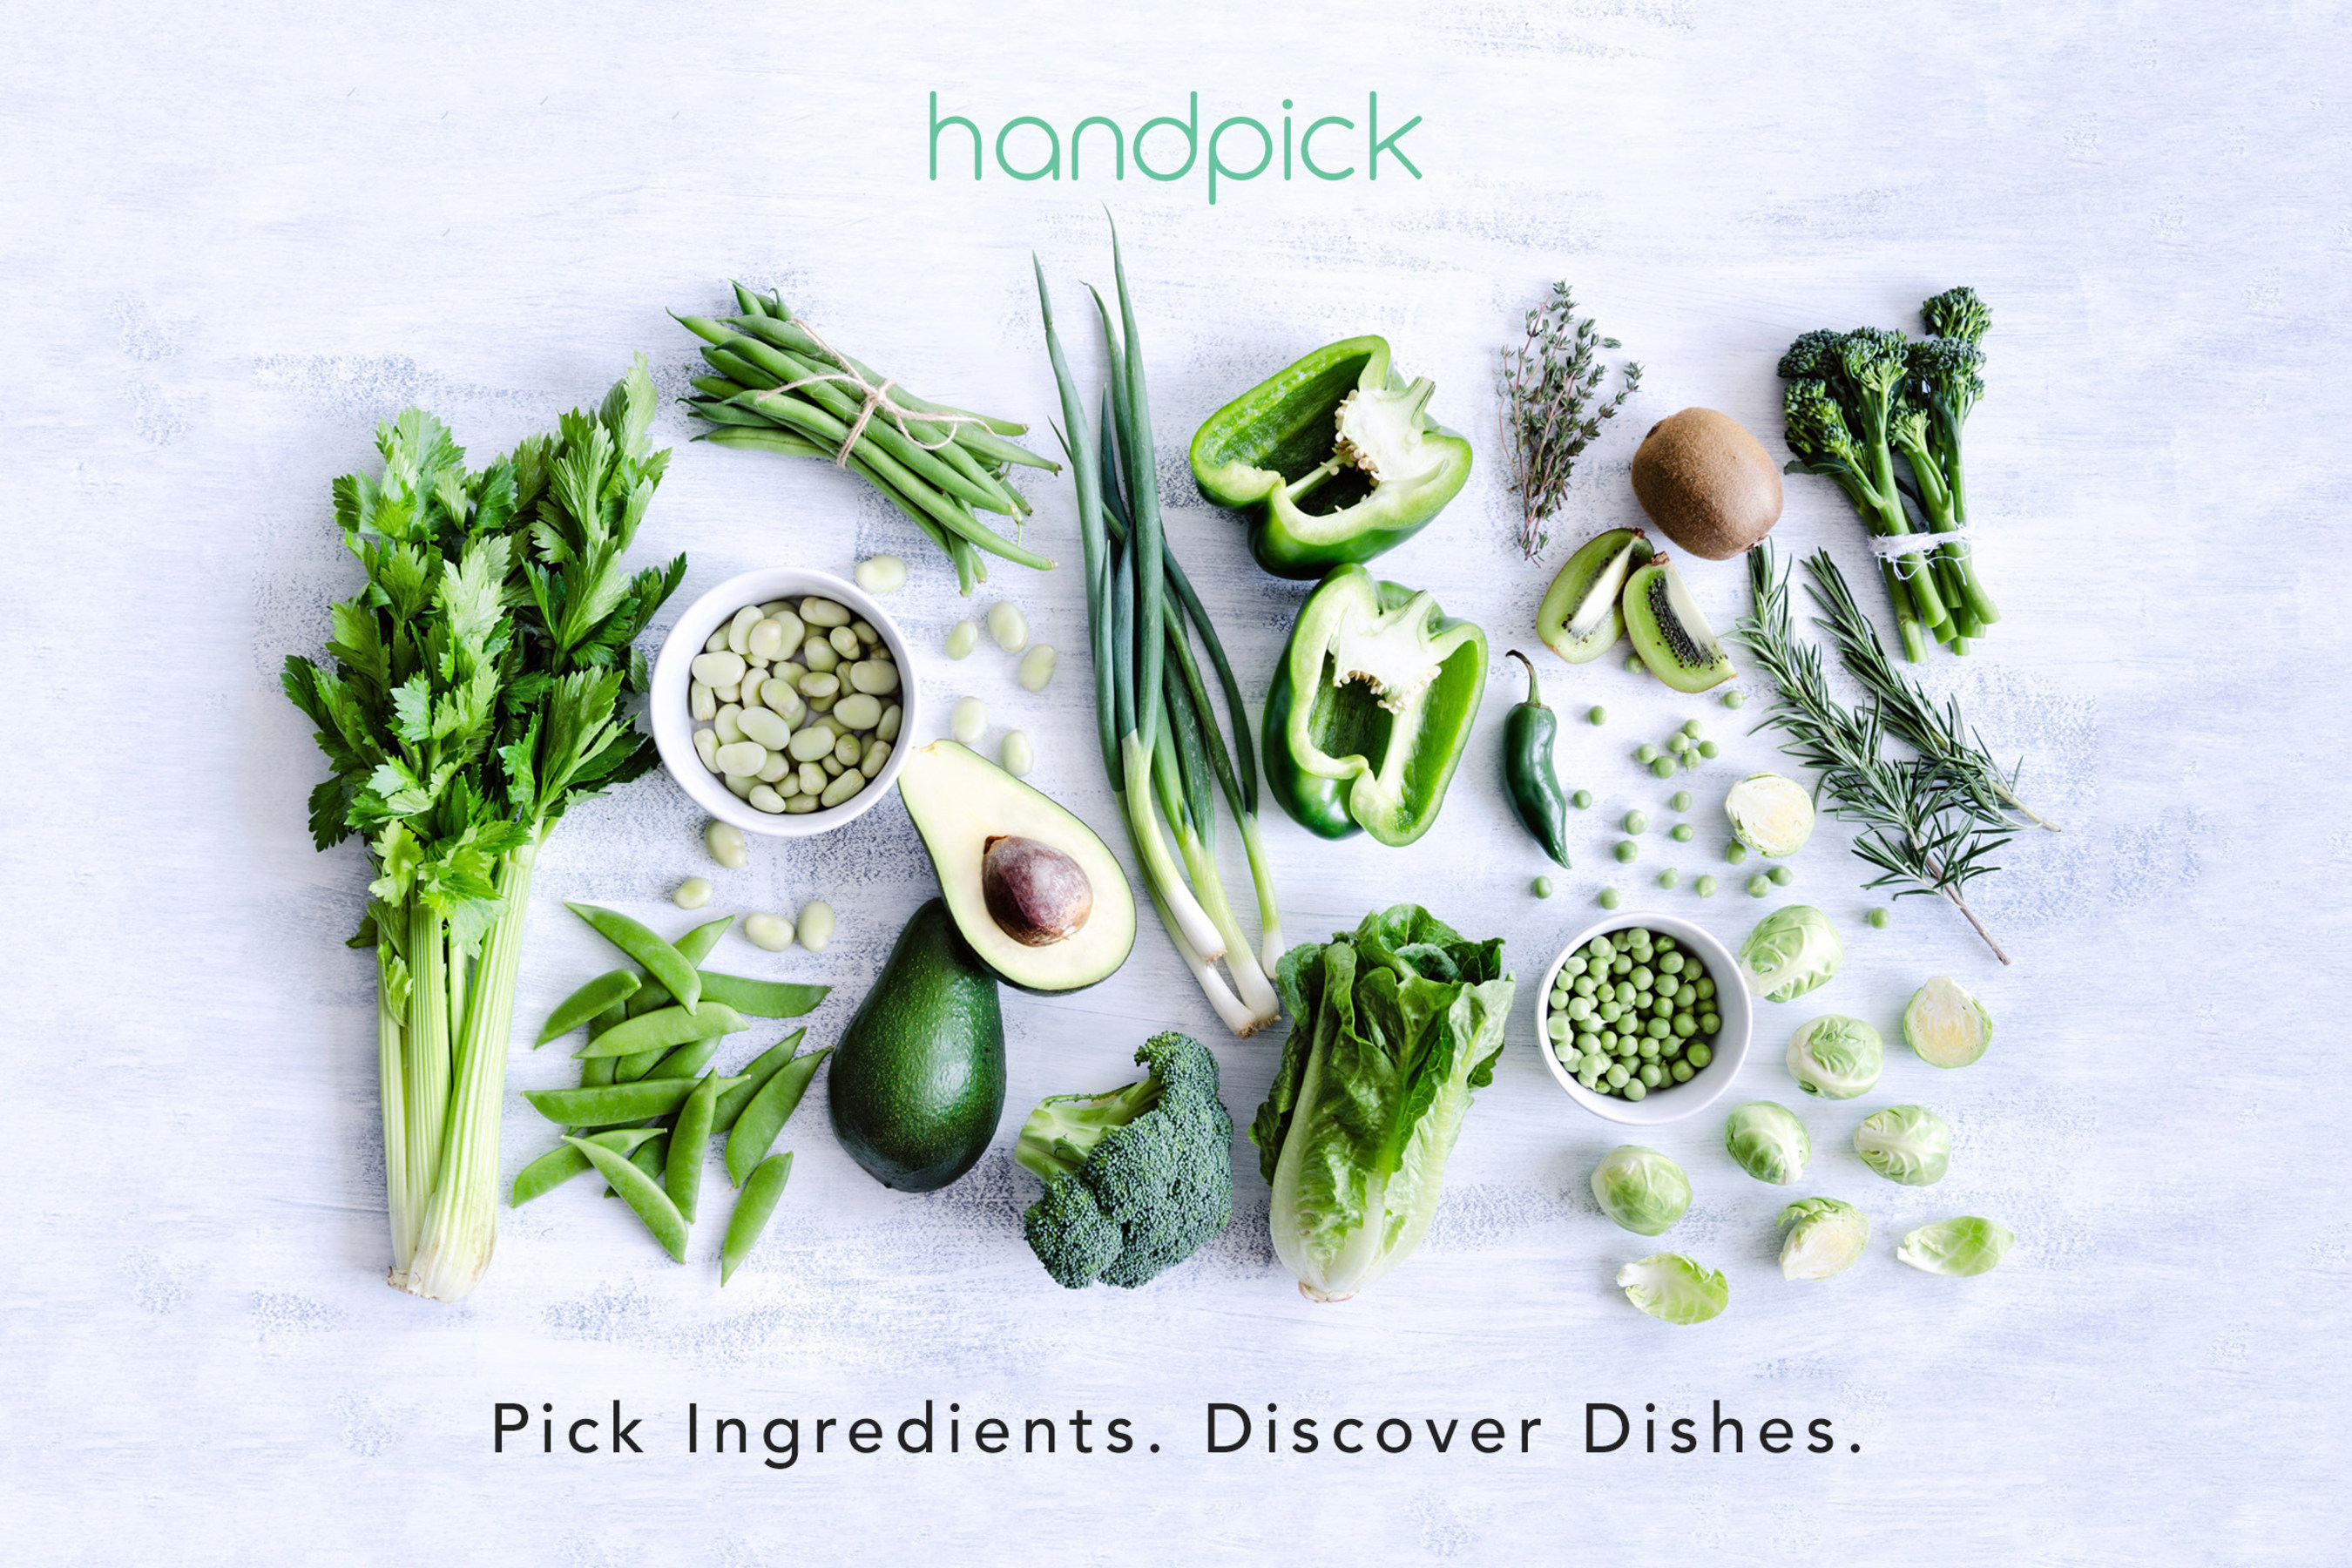 SF Food App Handpick Launches as the Largest Searchable Collection of Food Posts